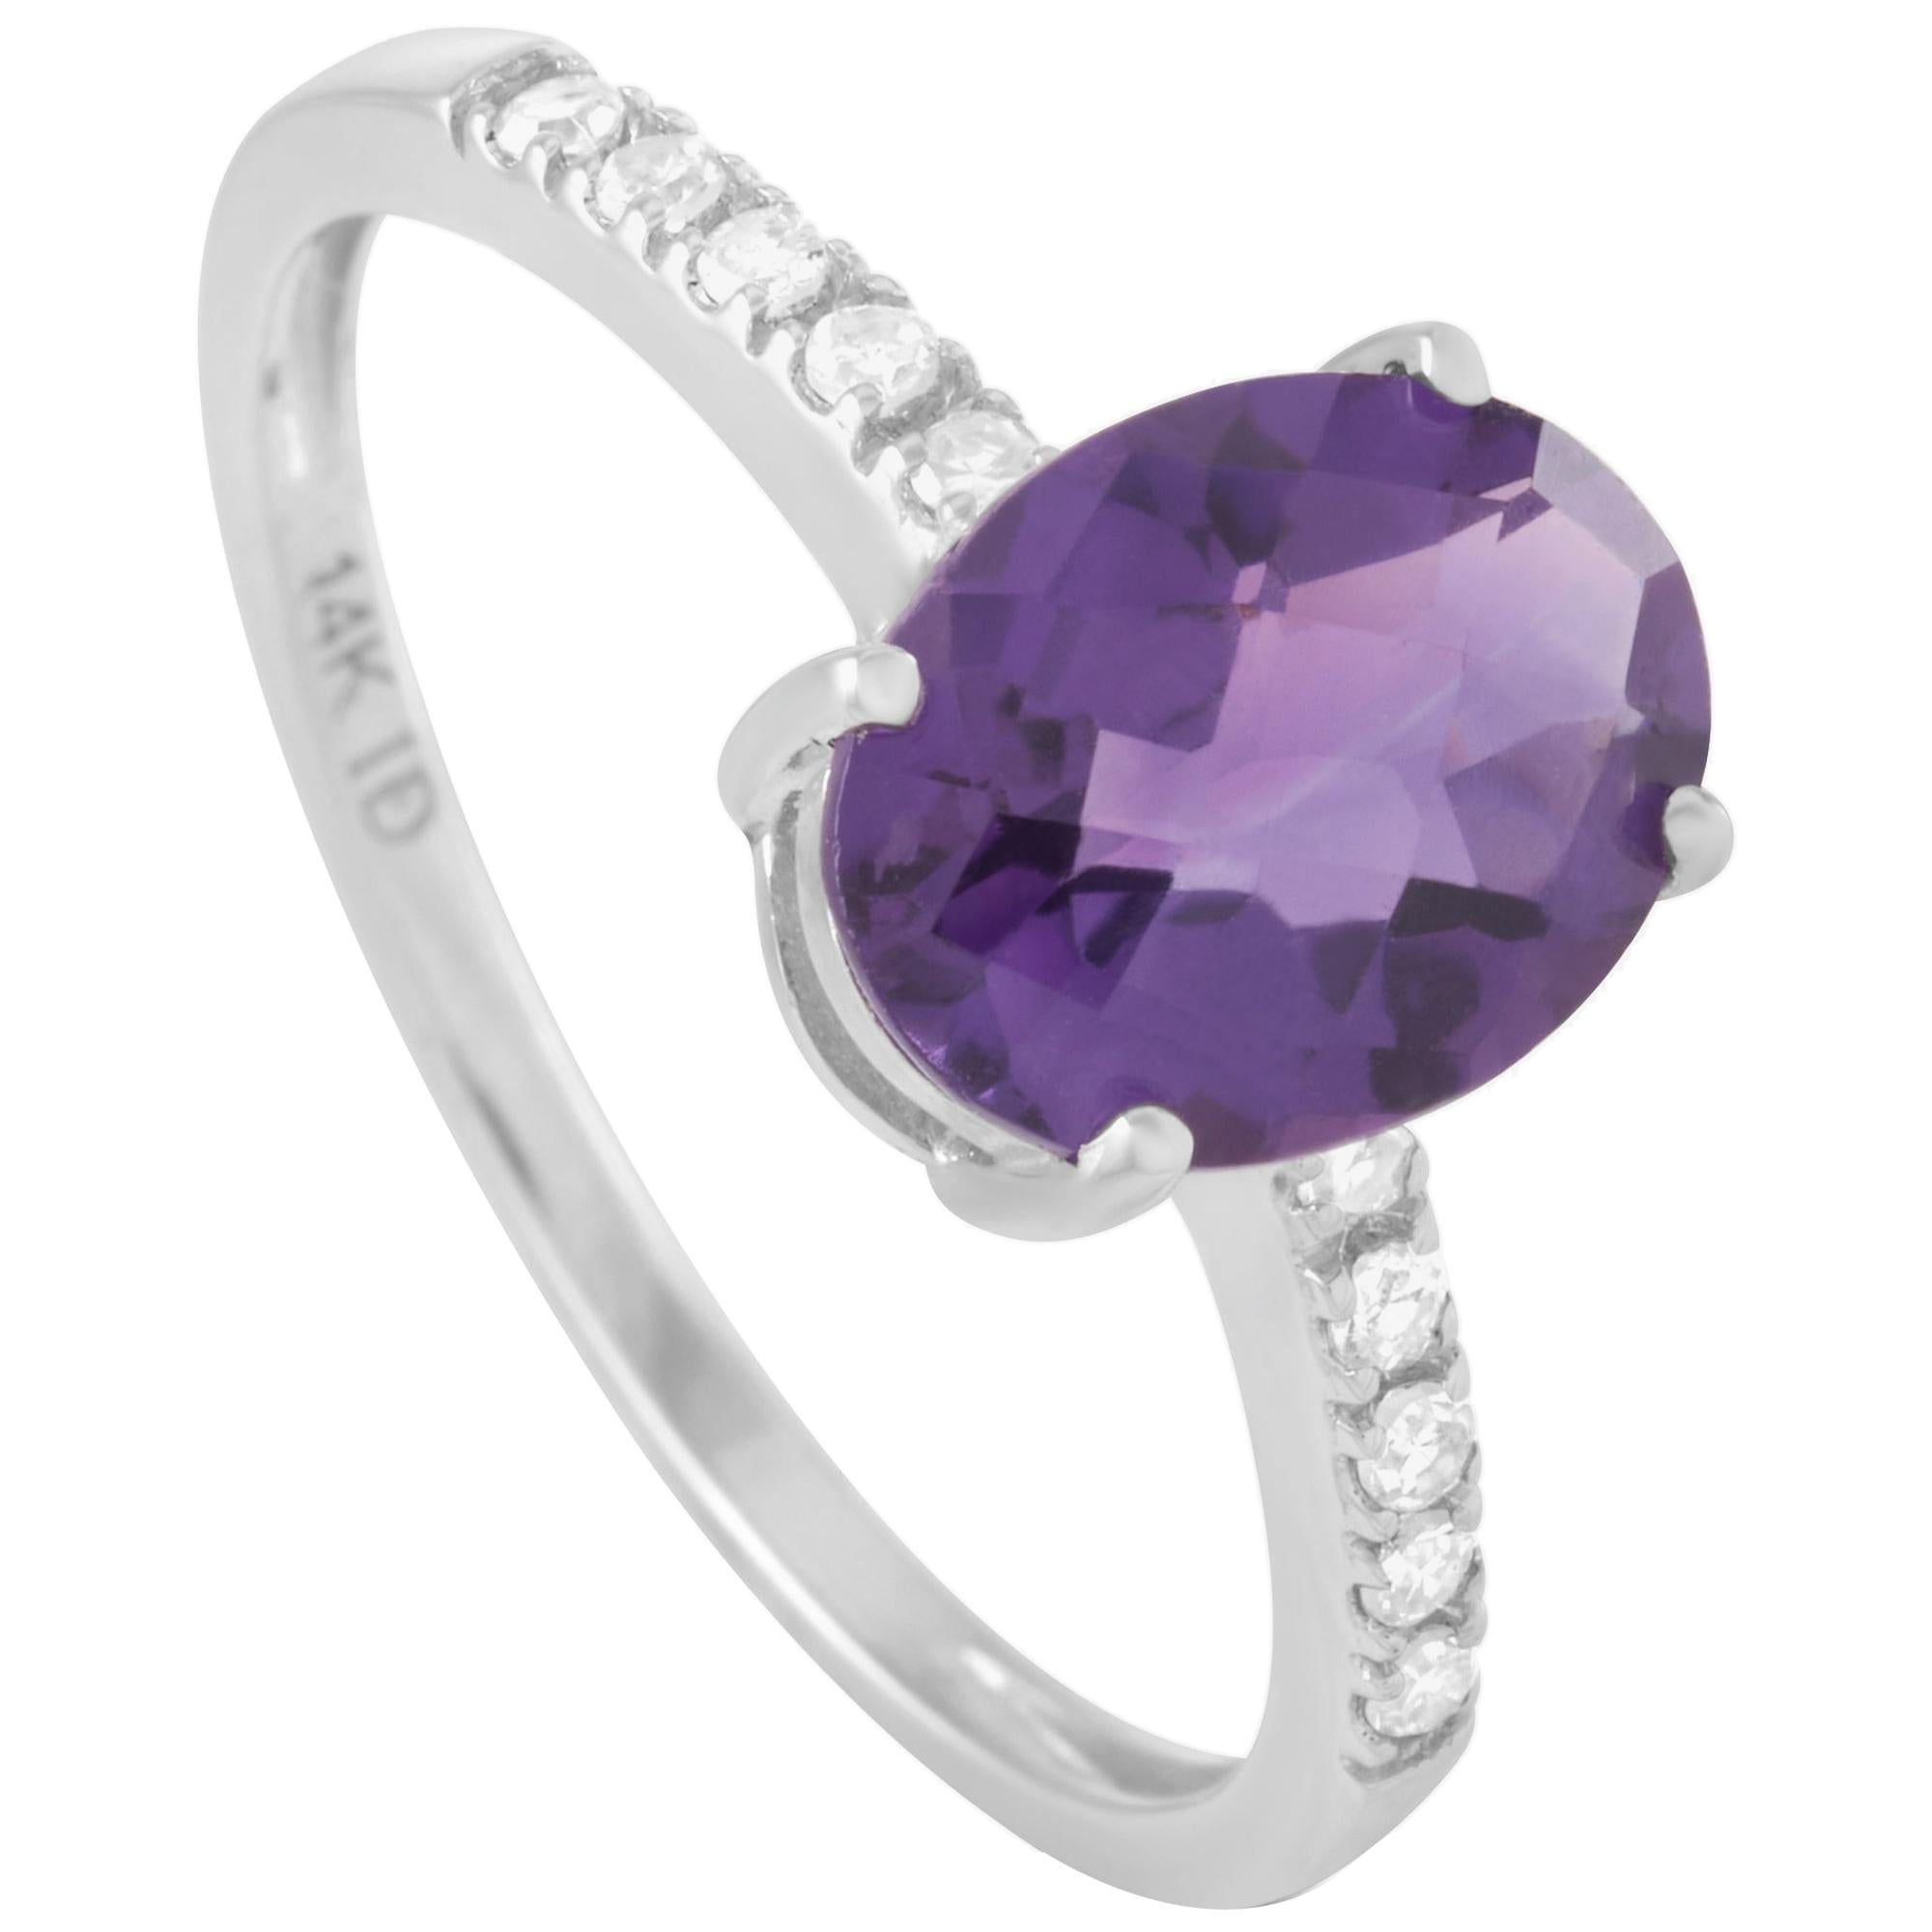 LB Exclusive 14 Karat White Gold 0.10 Carat Diamond and Oval Amethyst Ring